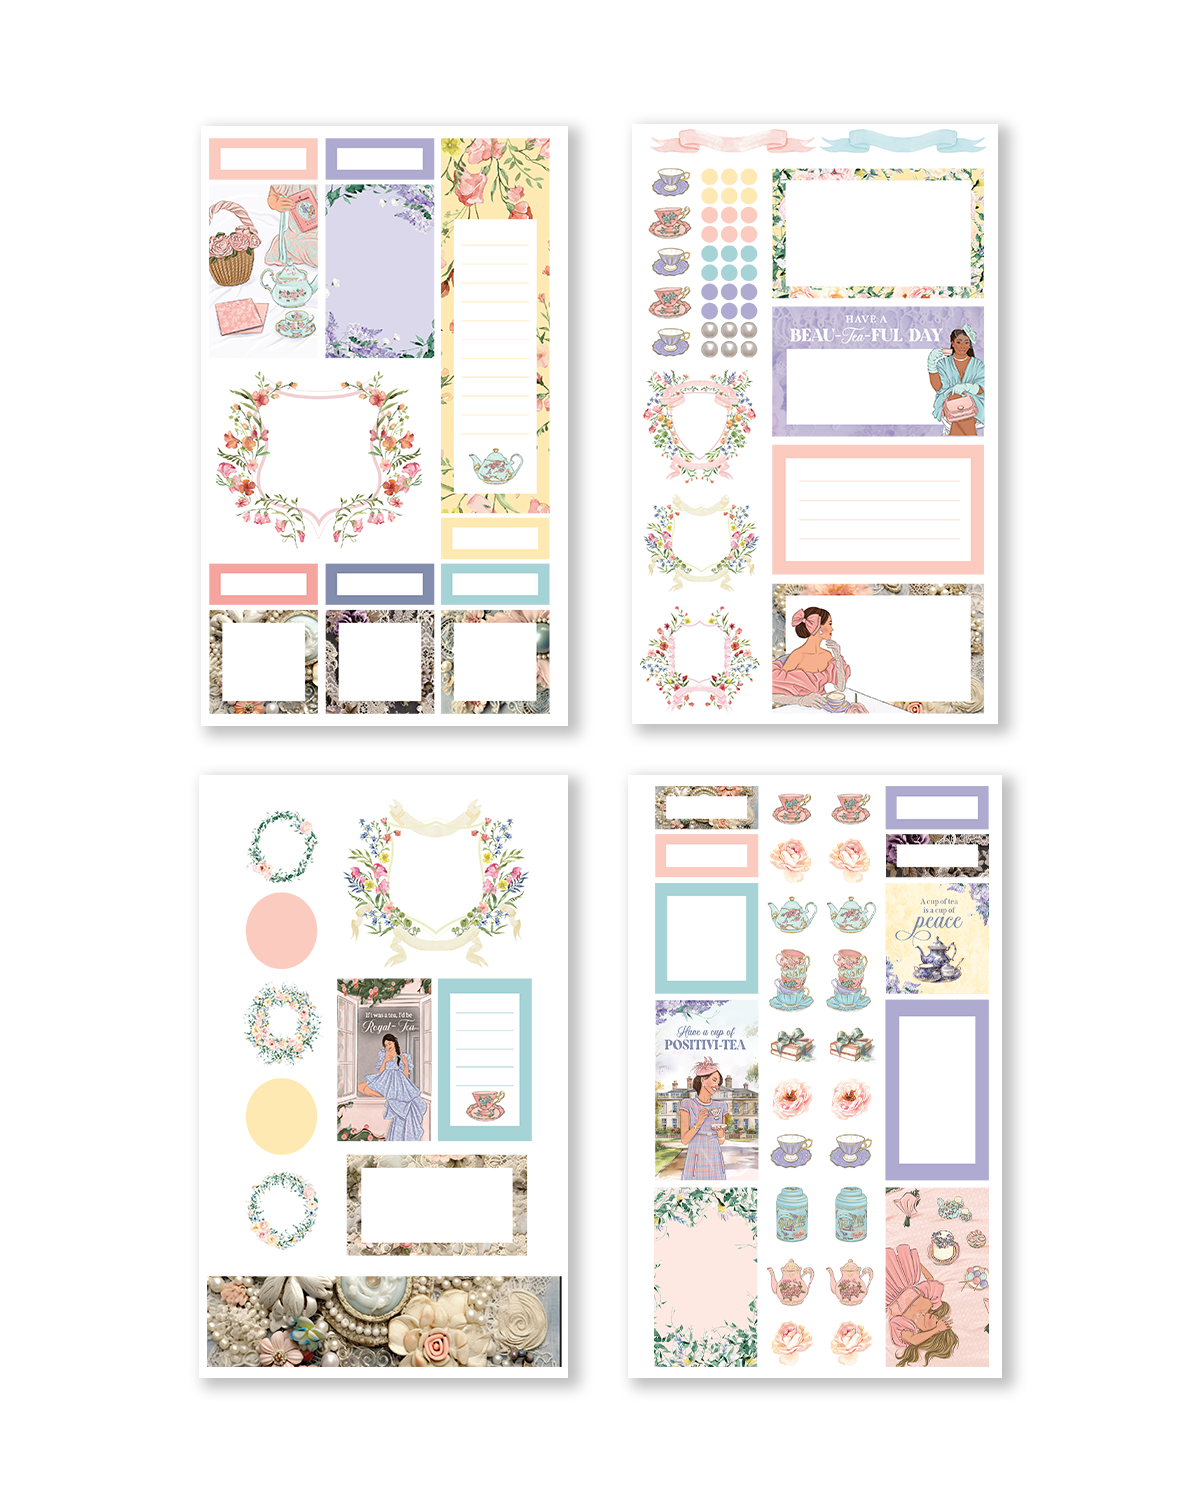 Shop Rongrong Tea Time Sticker Book for Journal